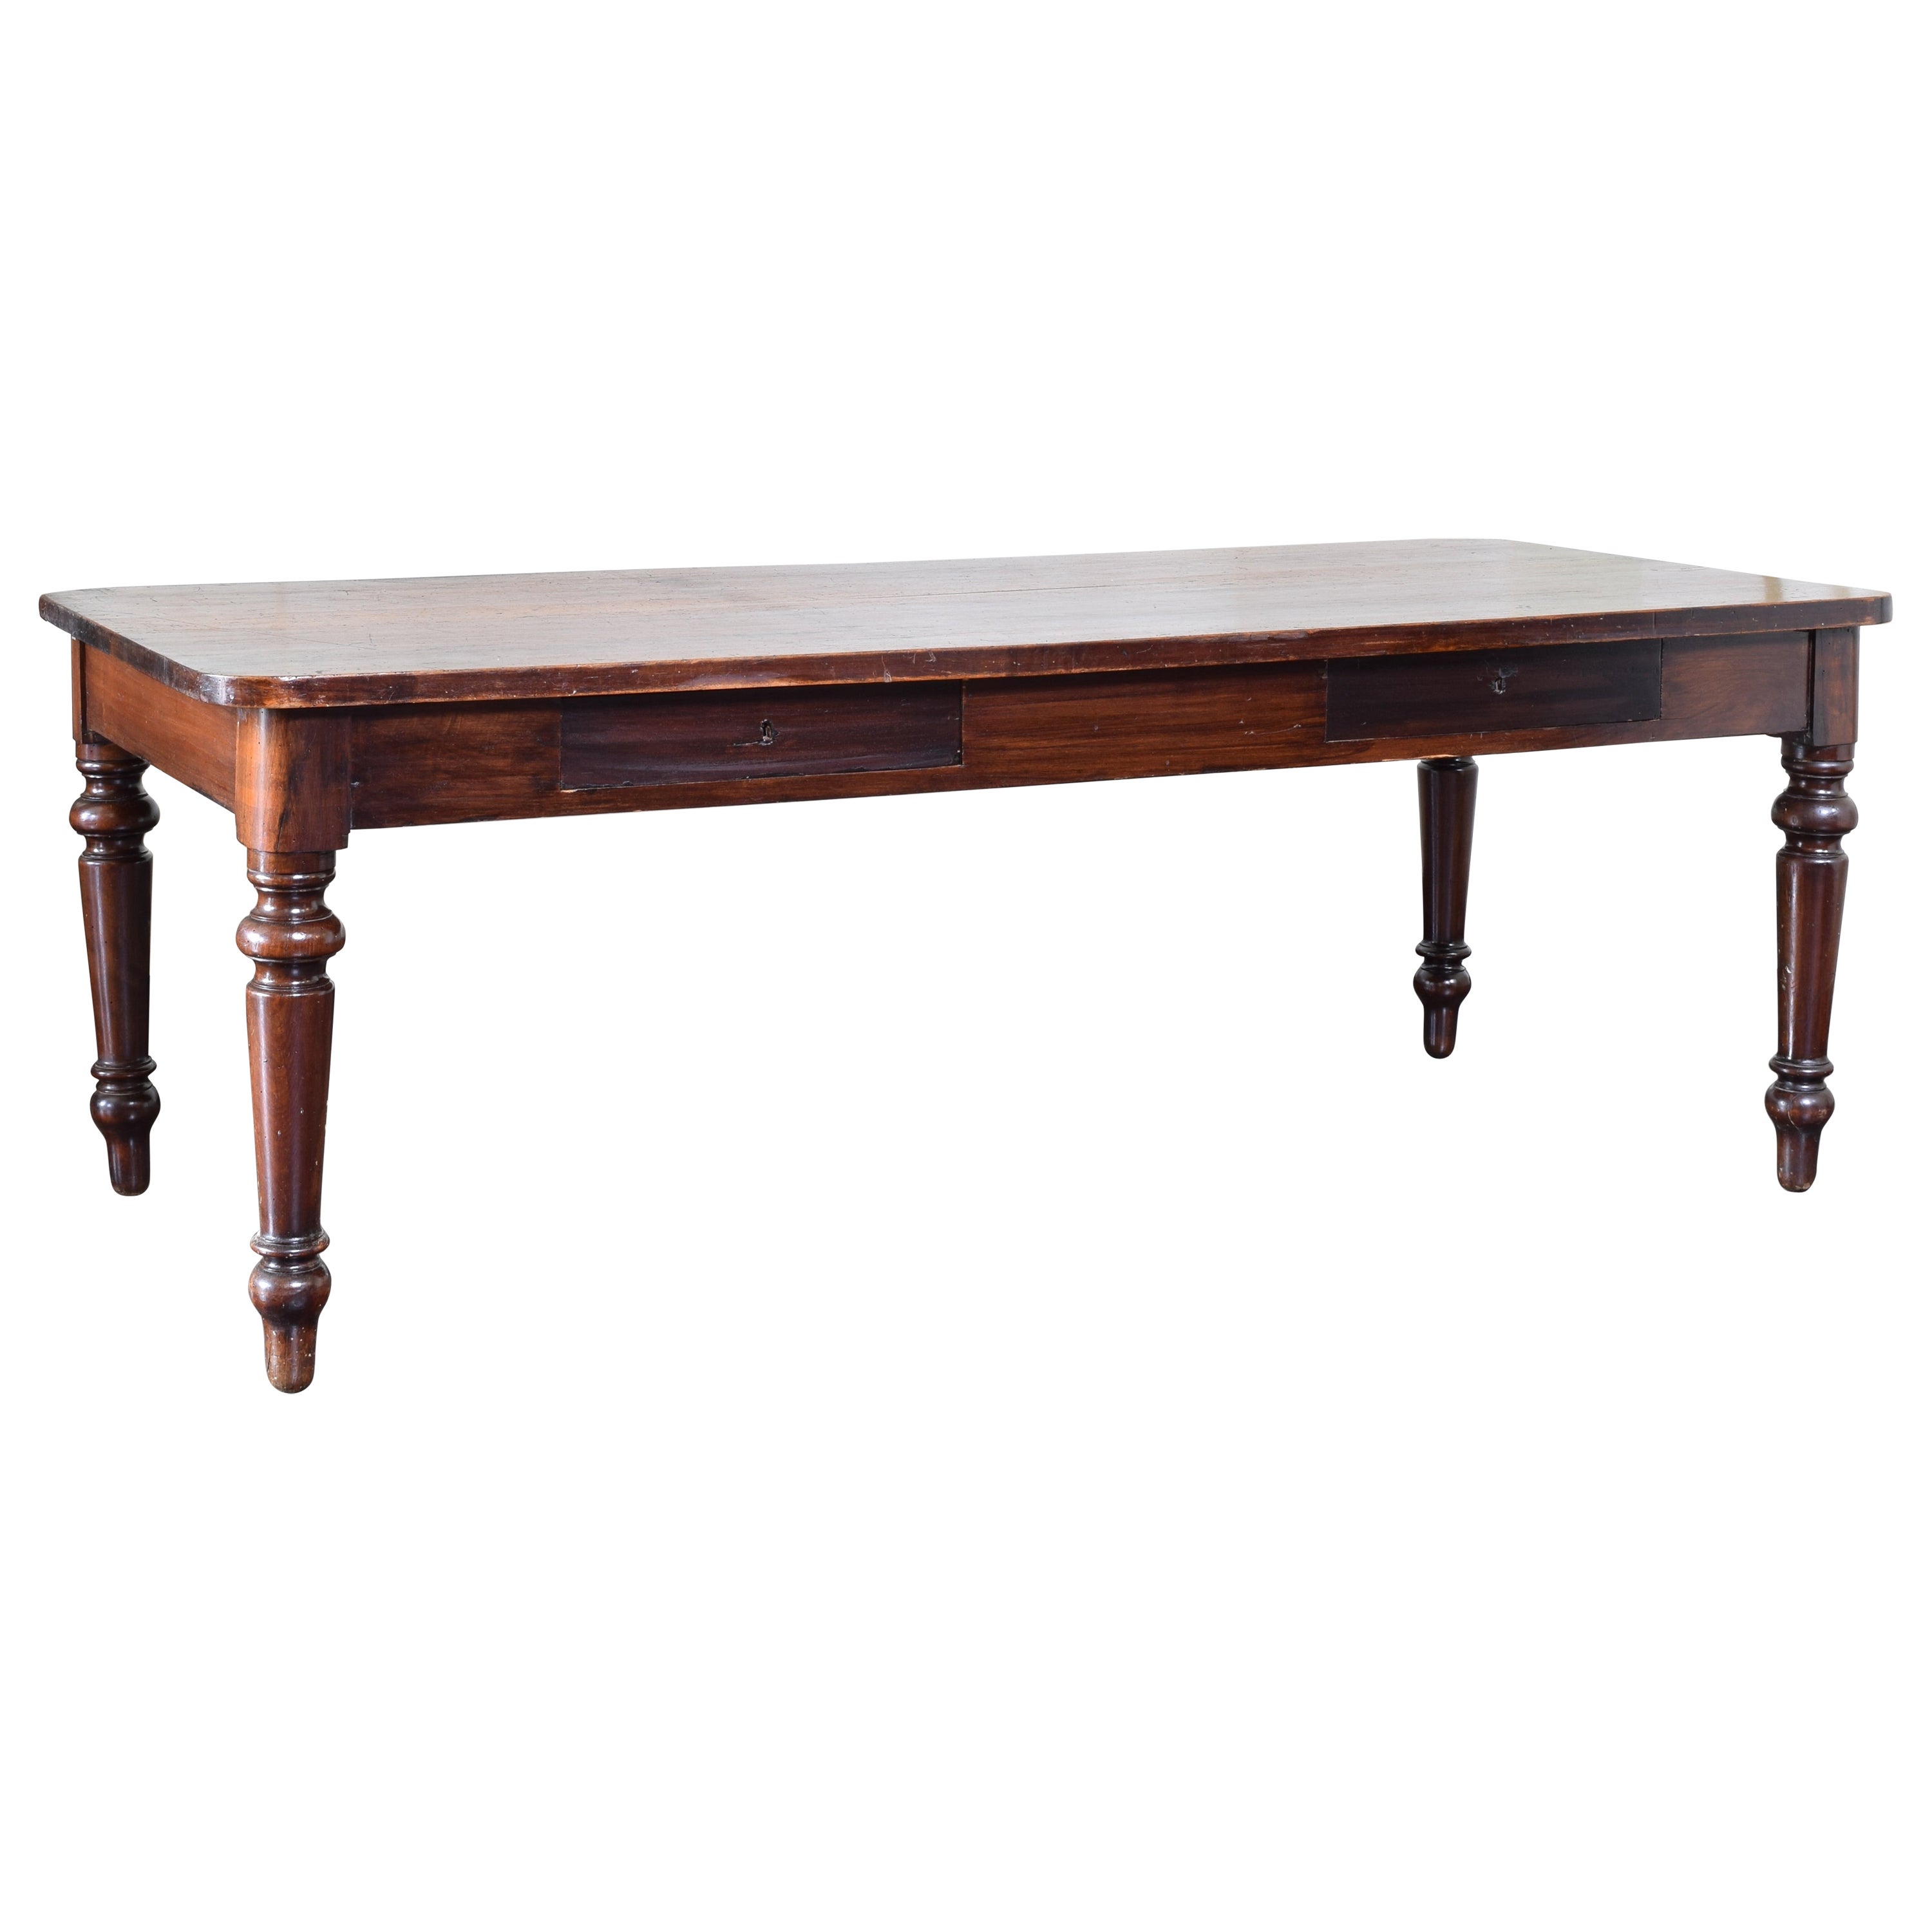 Italian Late Neoclassic Walnut 2-Drawer Library Table / Kitchen Island, ca. 1840 For Sale